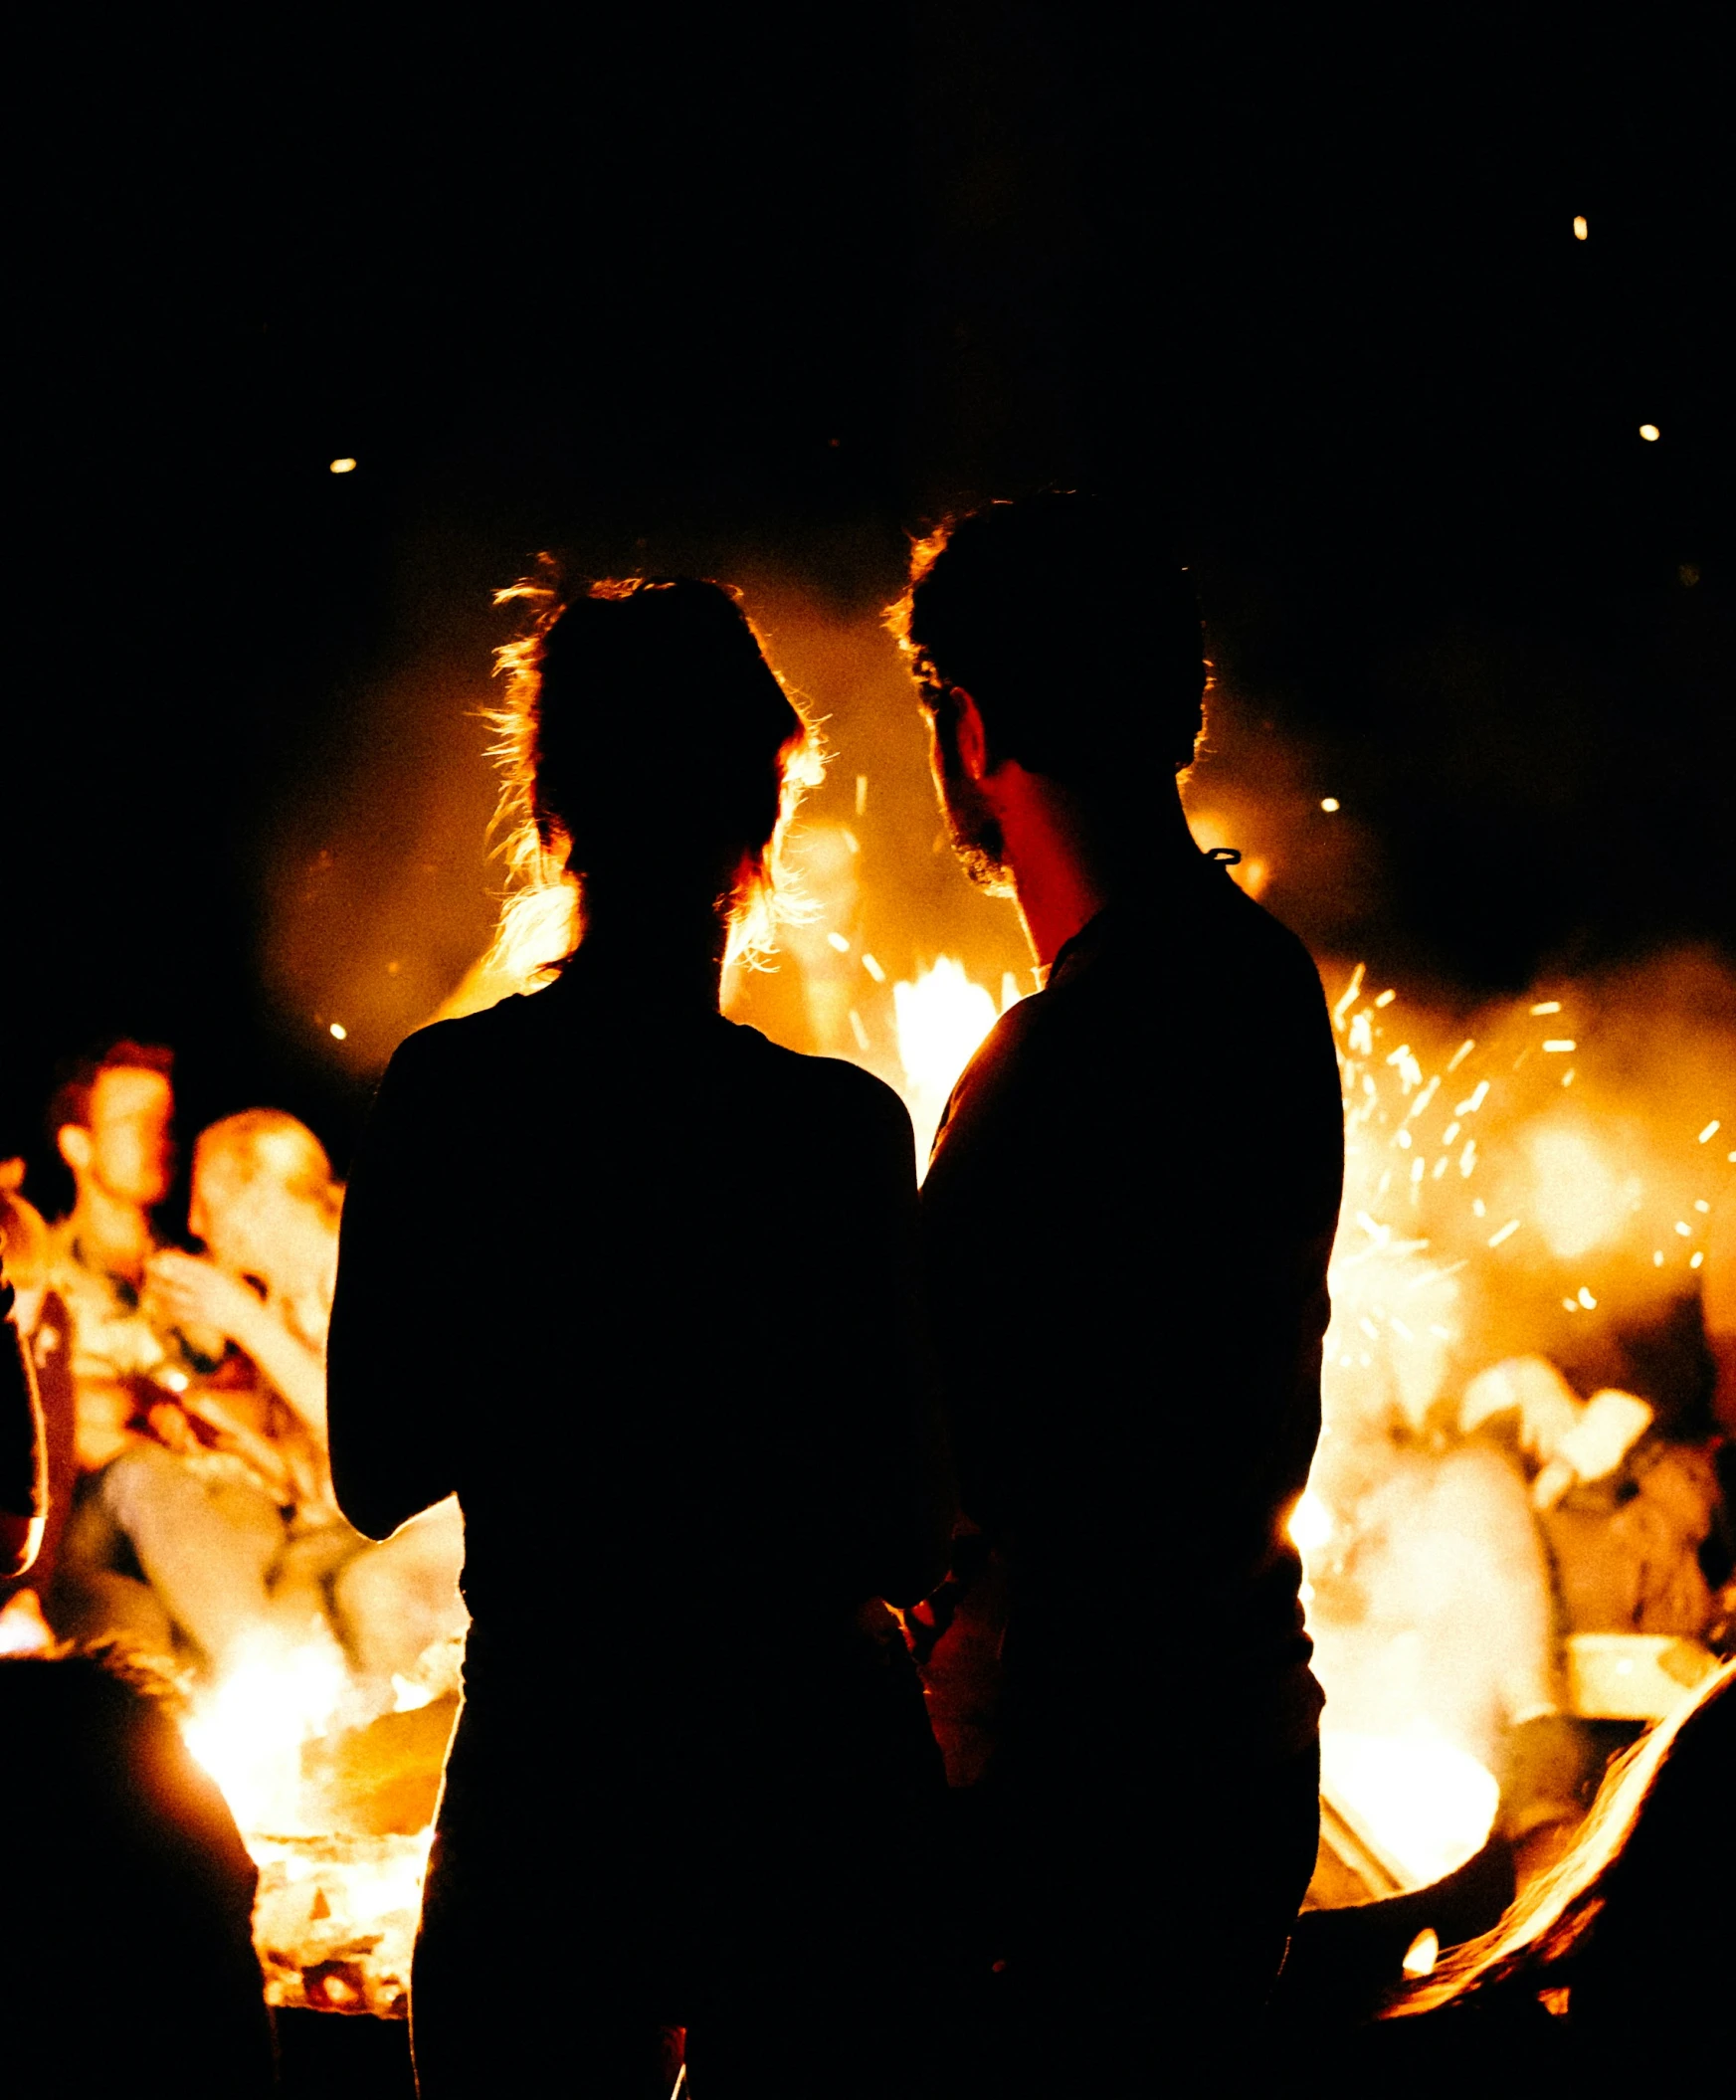 two people facing each other in front of a lot of fire